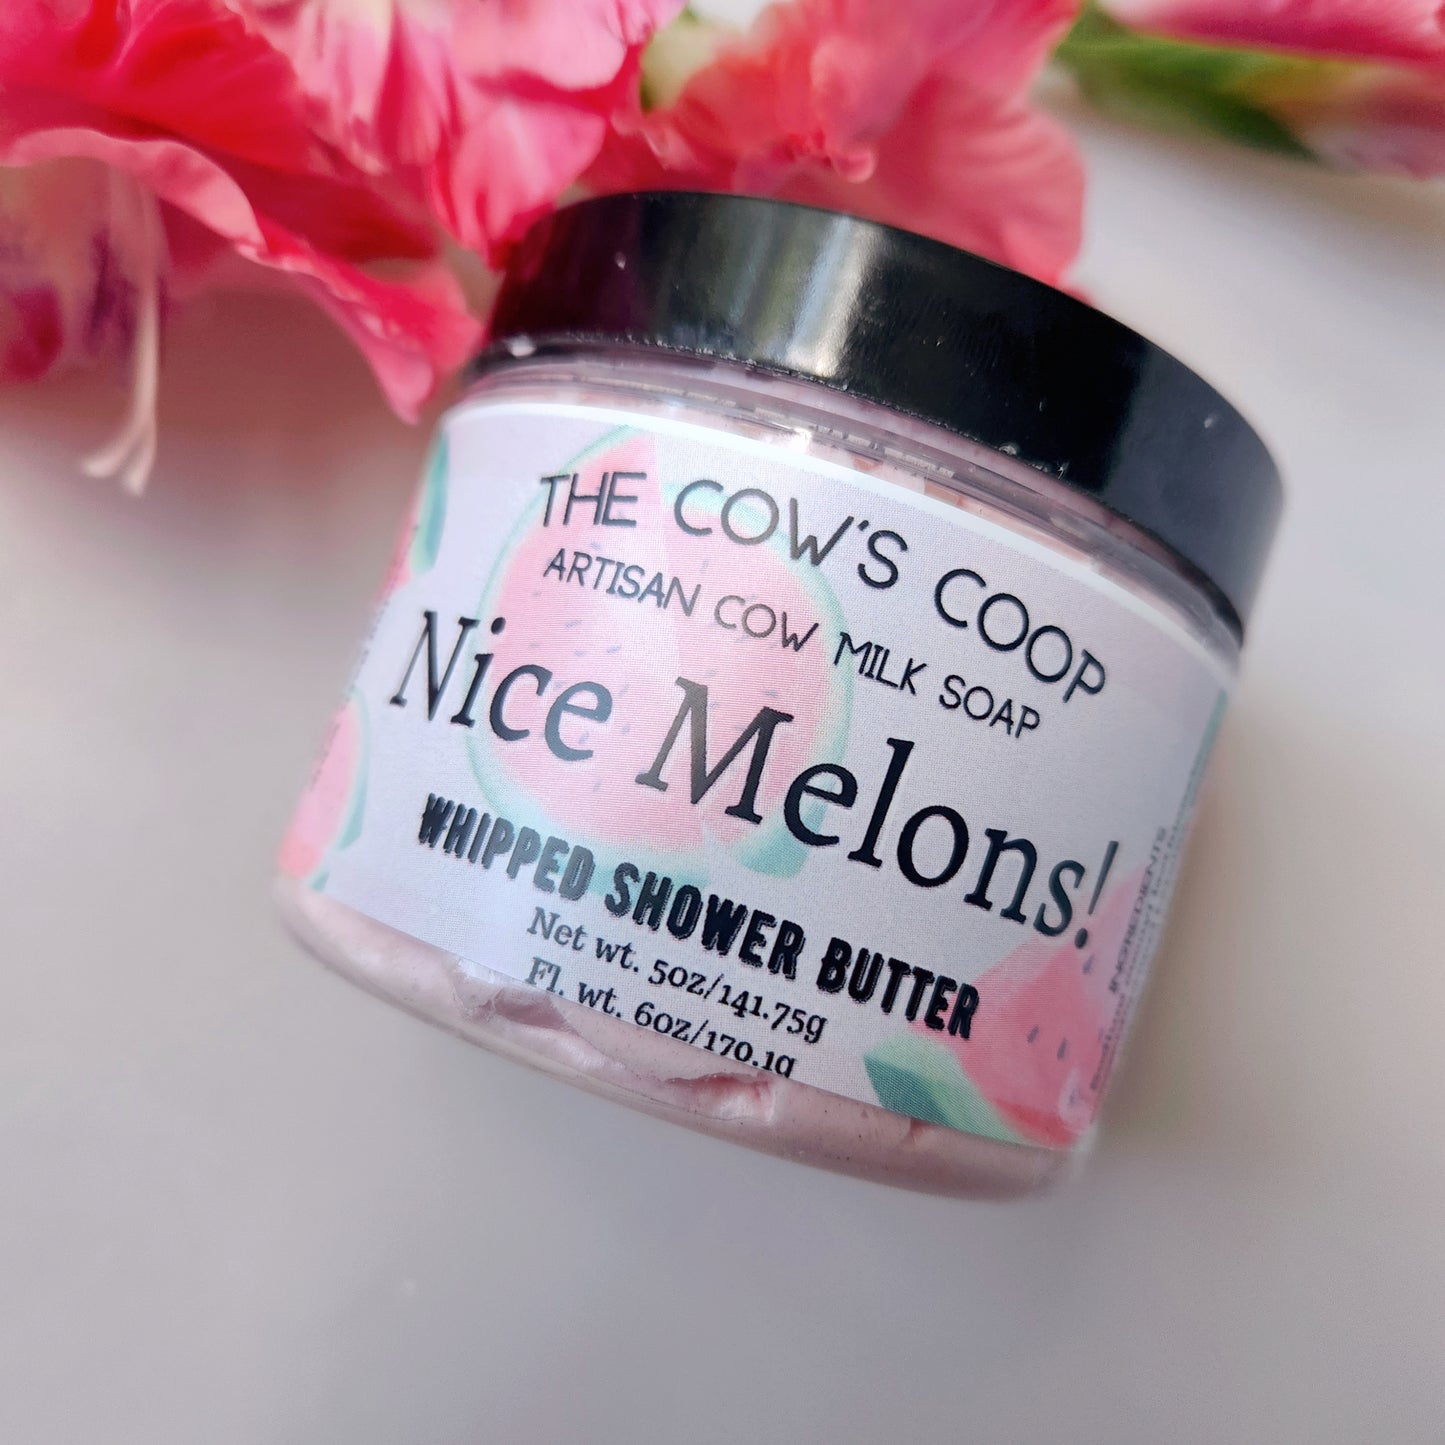 Nice Melons! - Whipped Shower Butter Cow Milk Soap